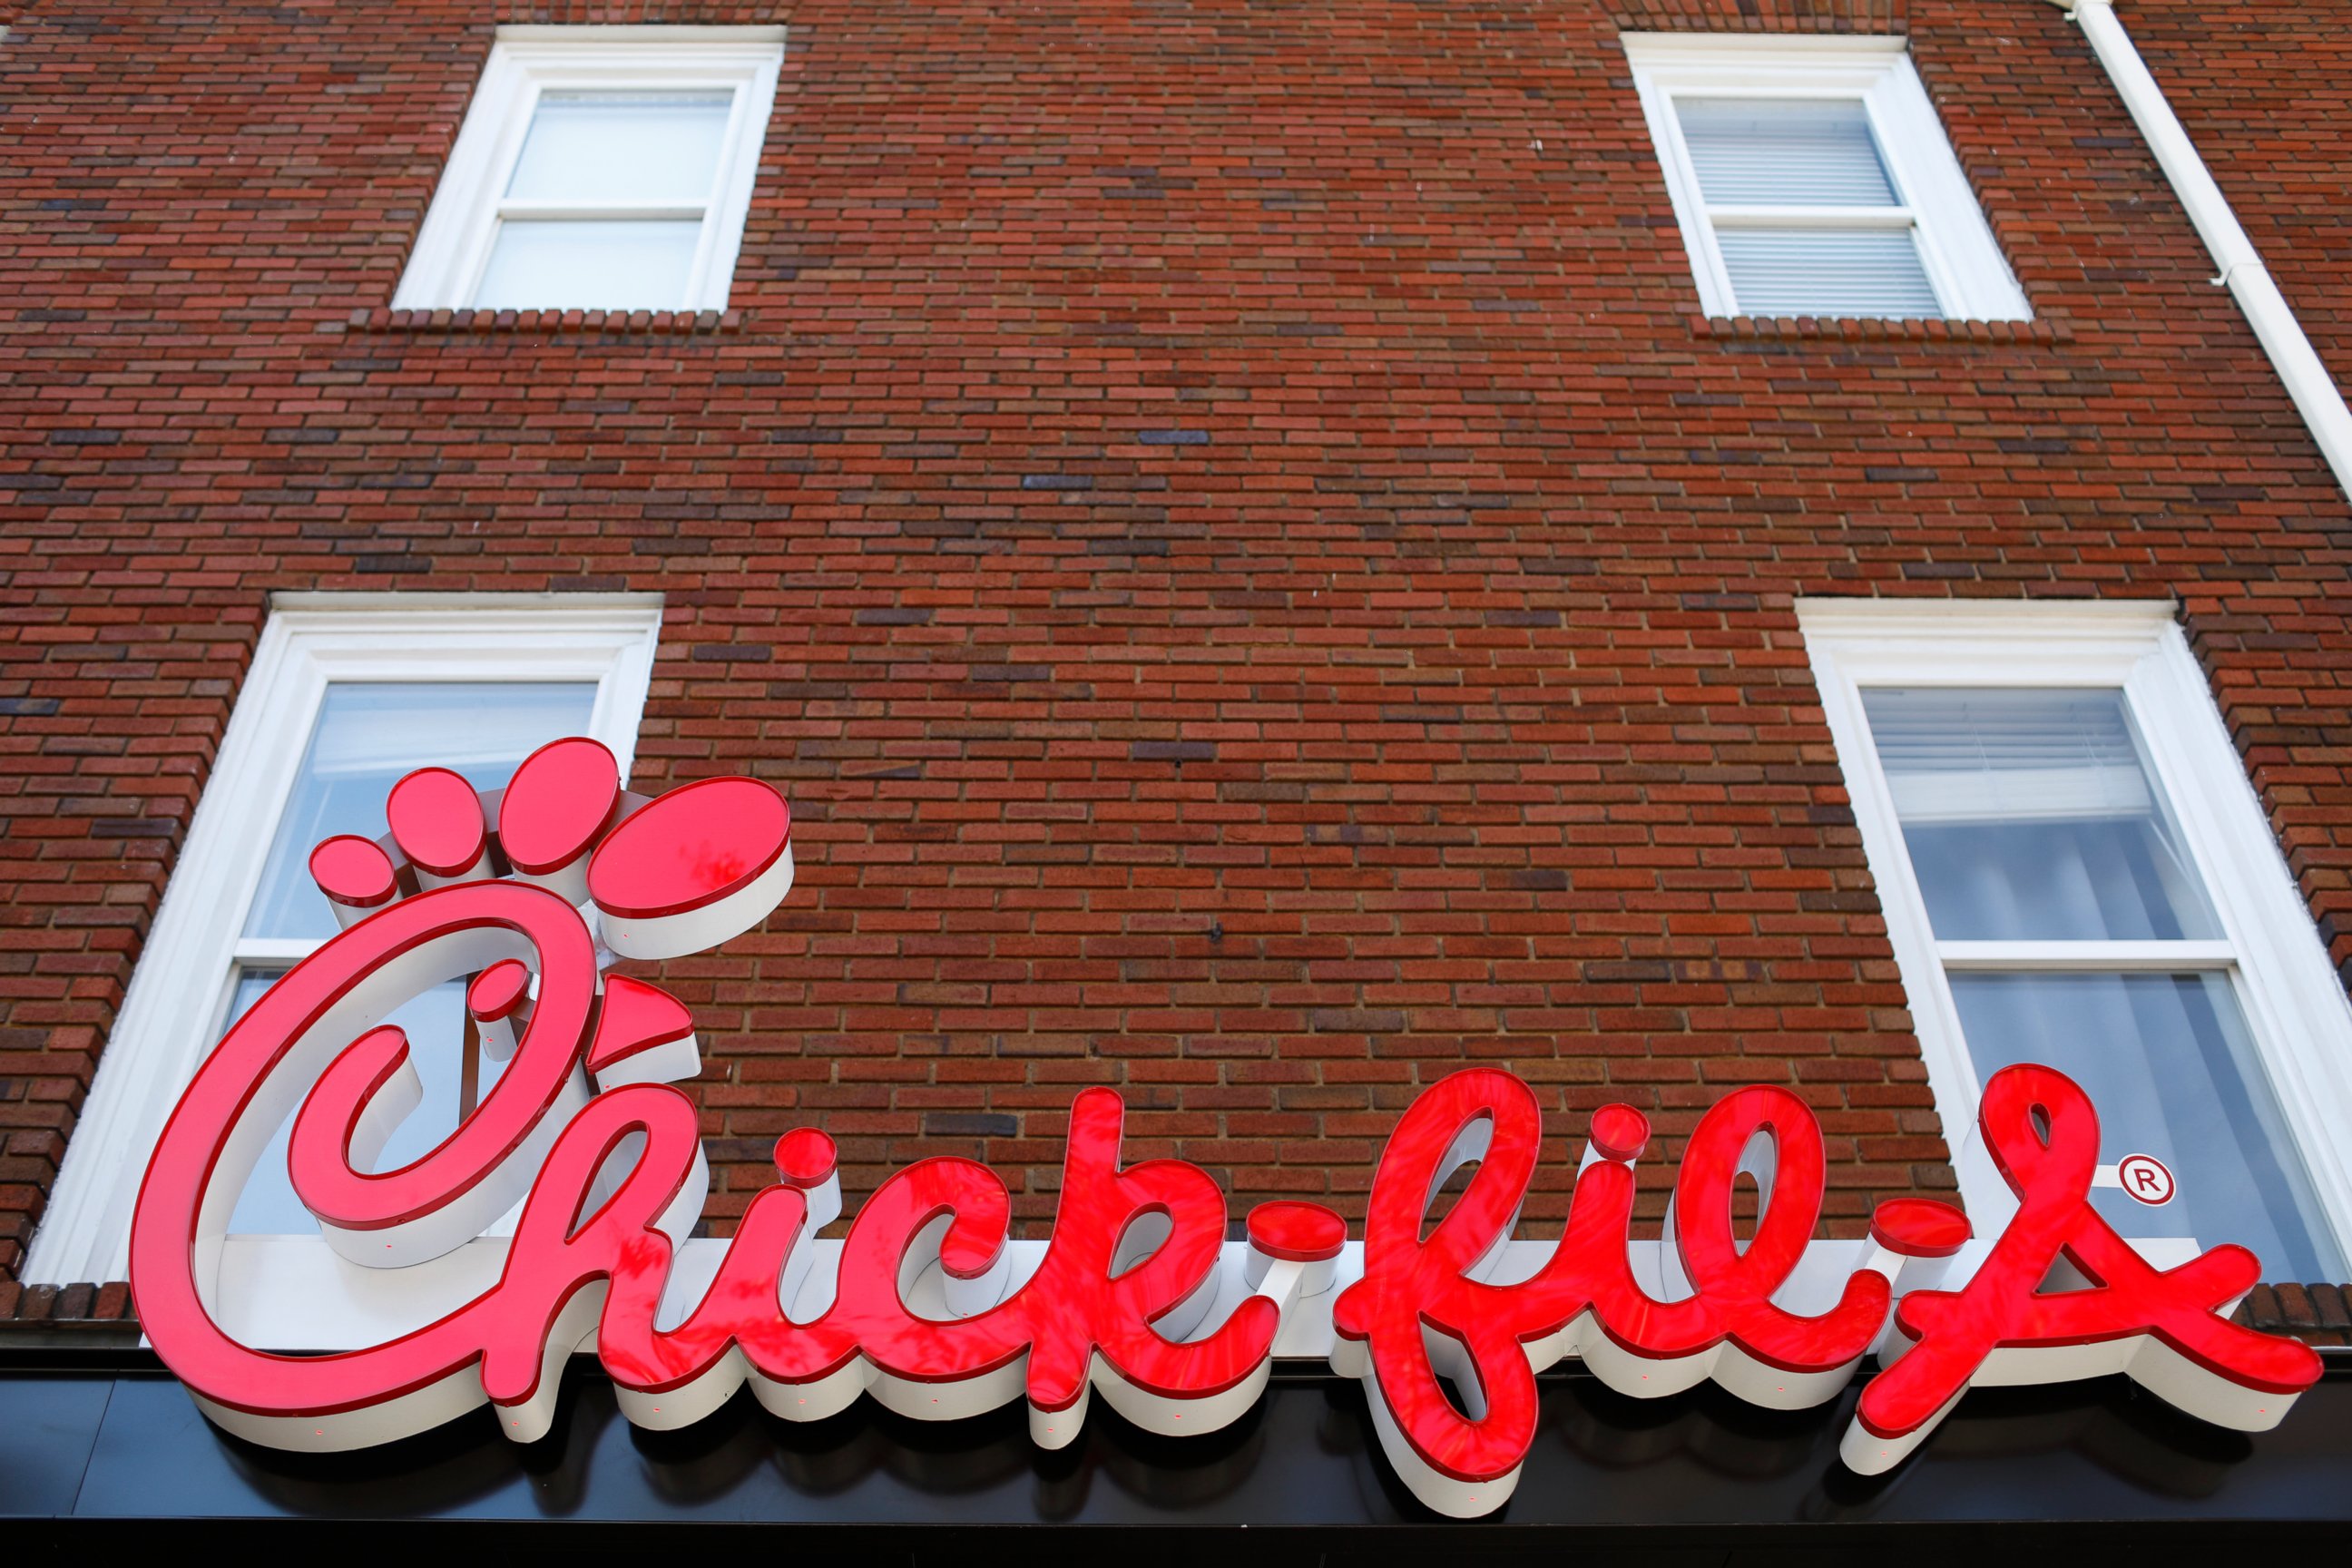 PHOTO: In this Oct. 30, 2018 file photo, Athens newest Chick-fil-A signage is set to open in downtown, Athens, Ga.